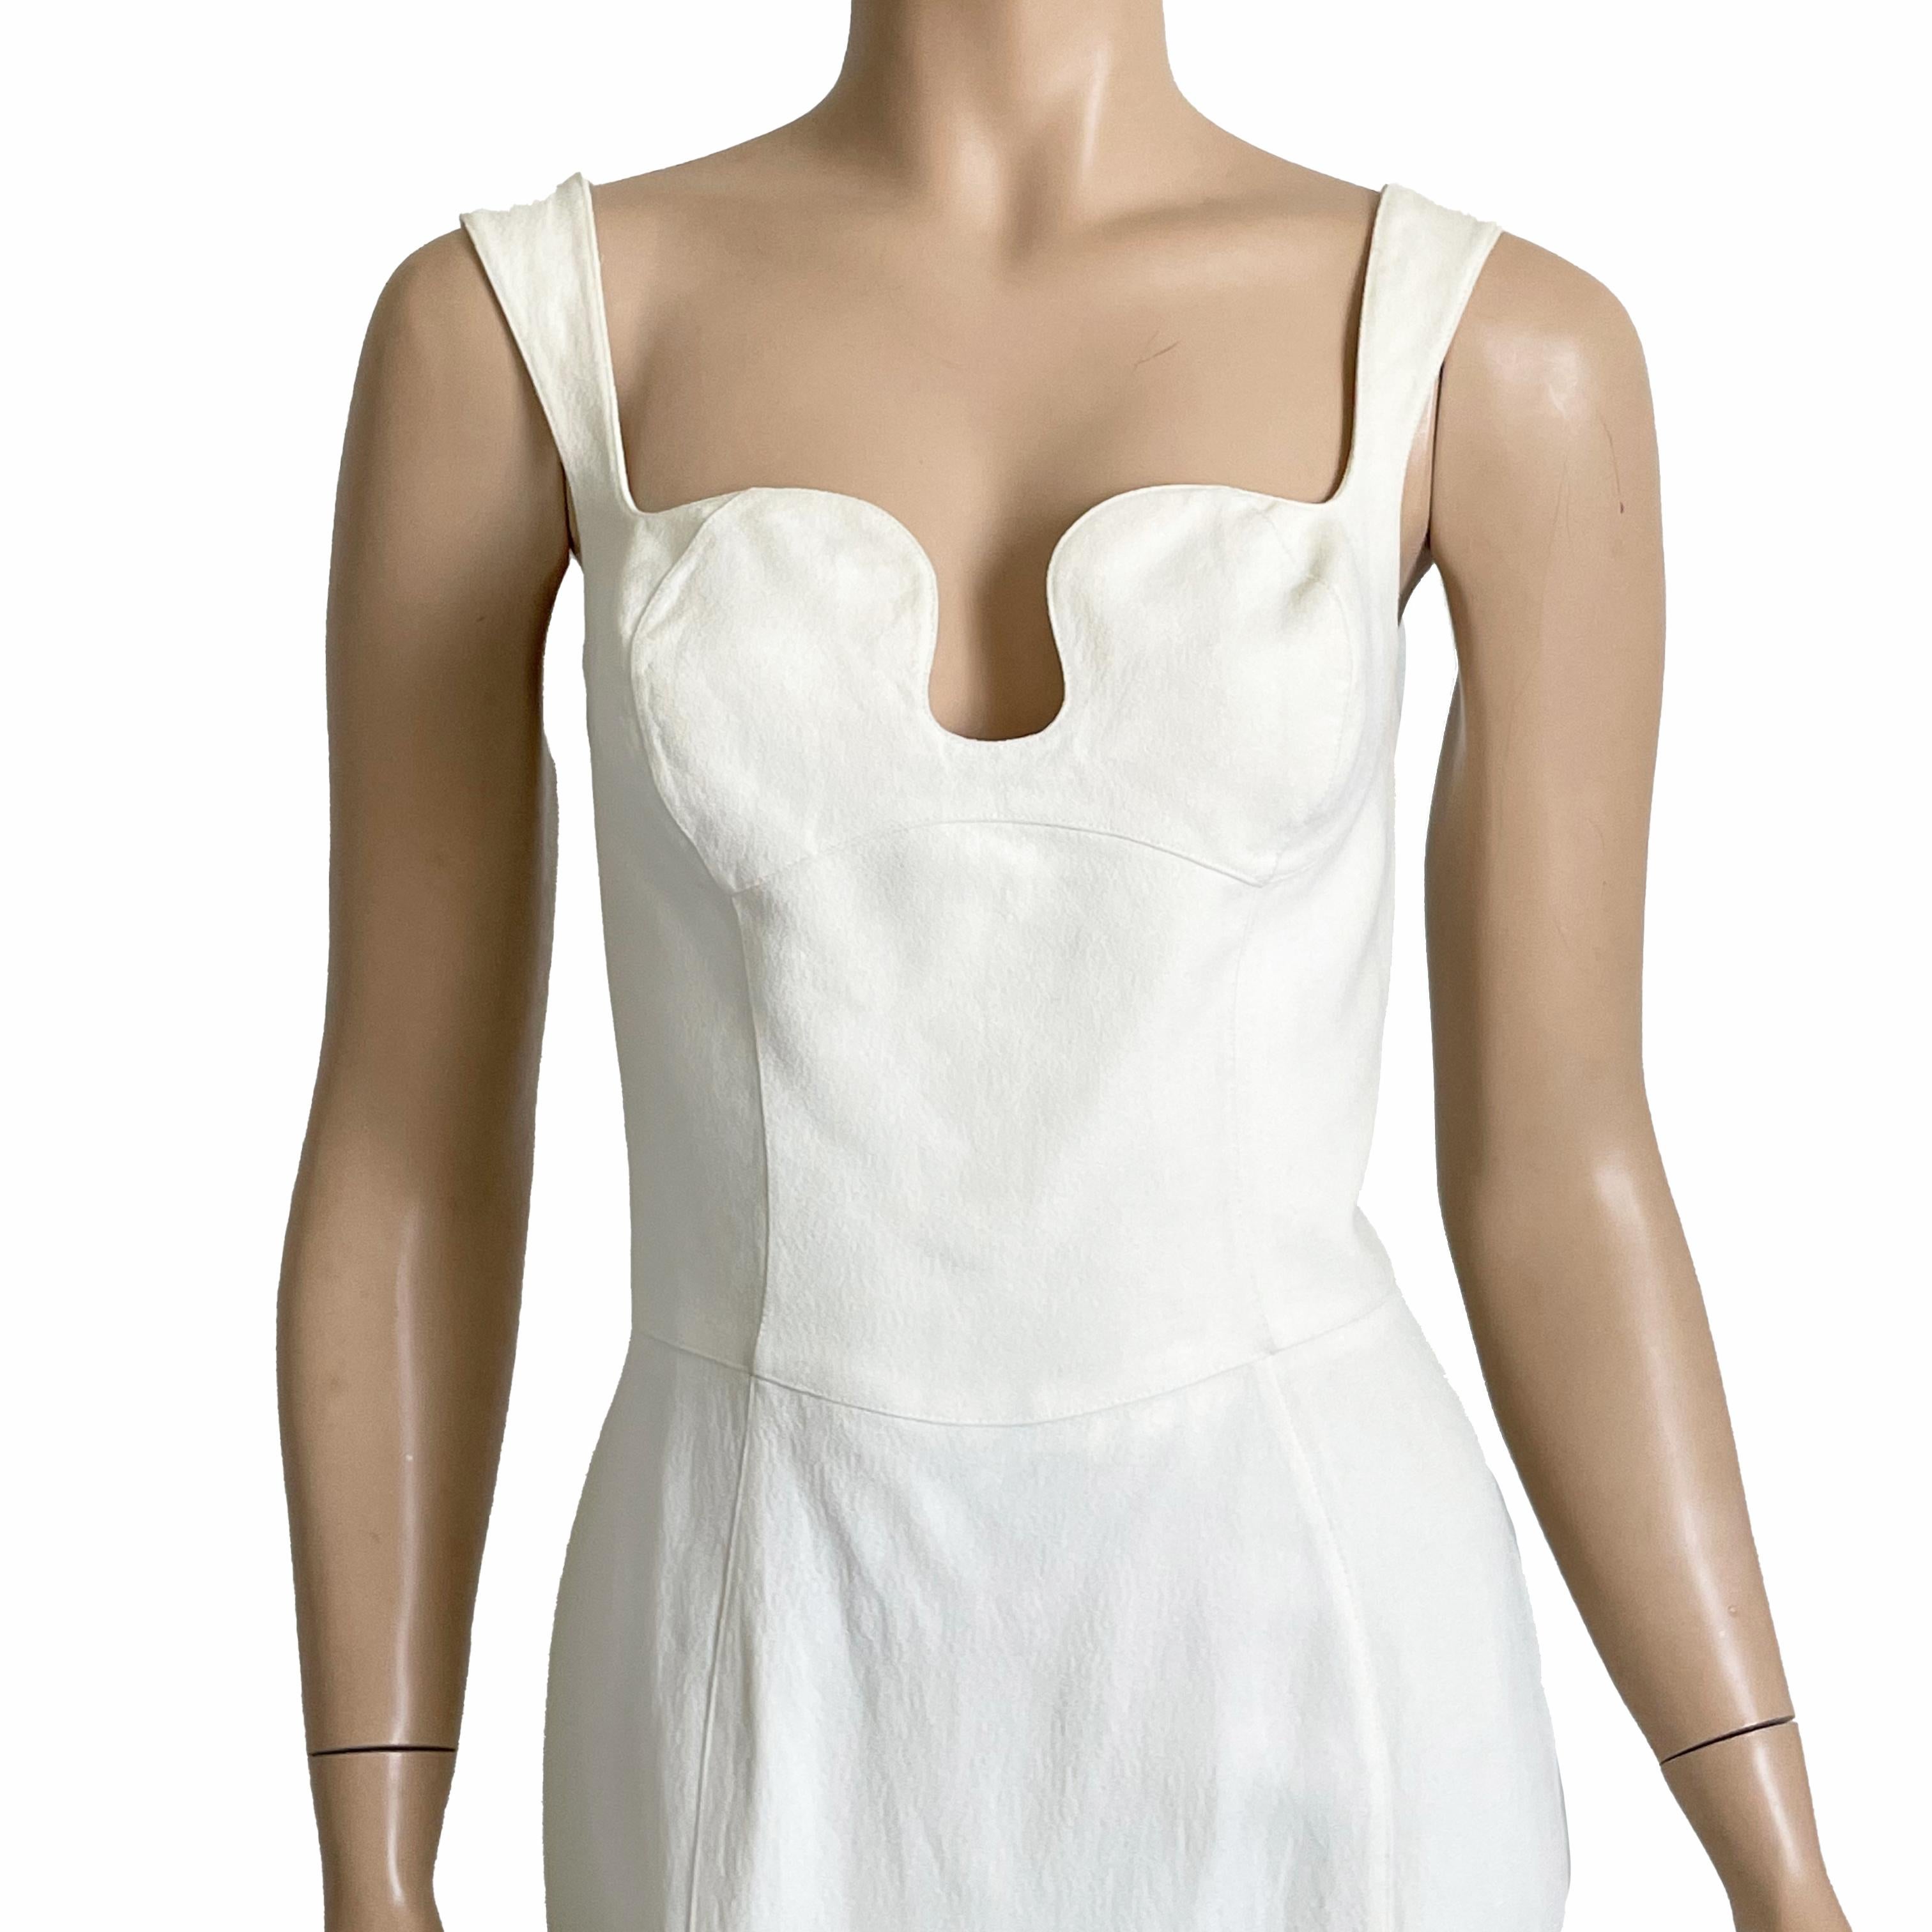 Thierry Mugler Cocktail Dress White Crepe Sculptural Chic Vintage 90s Sz 40 HTF In Good Condition For Sale In Port Saint Lucie, FL